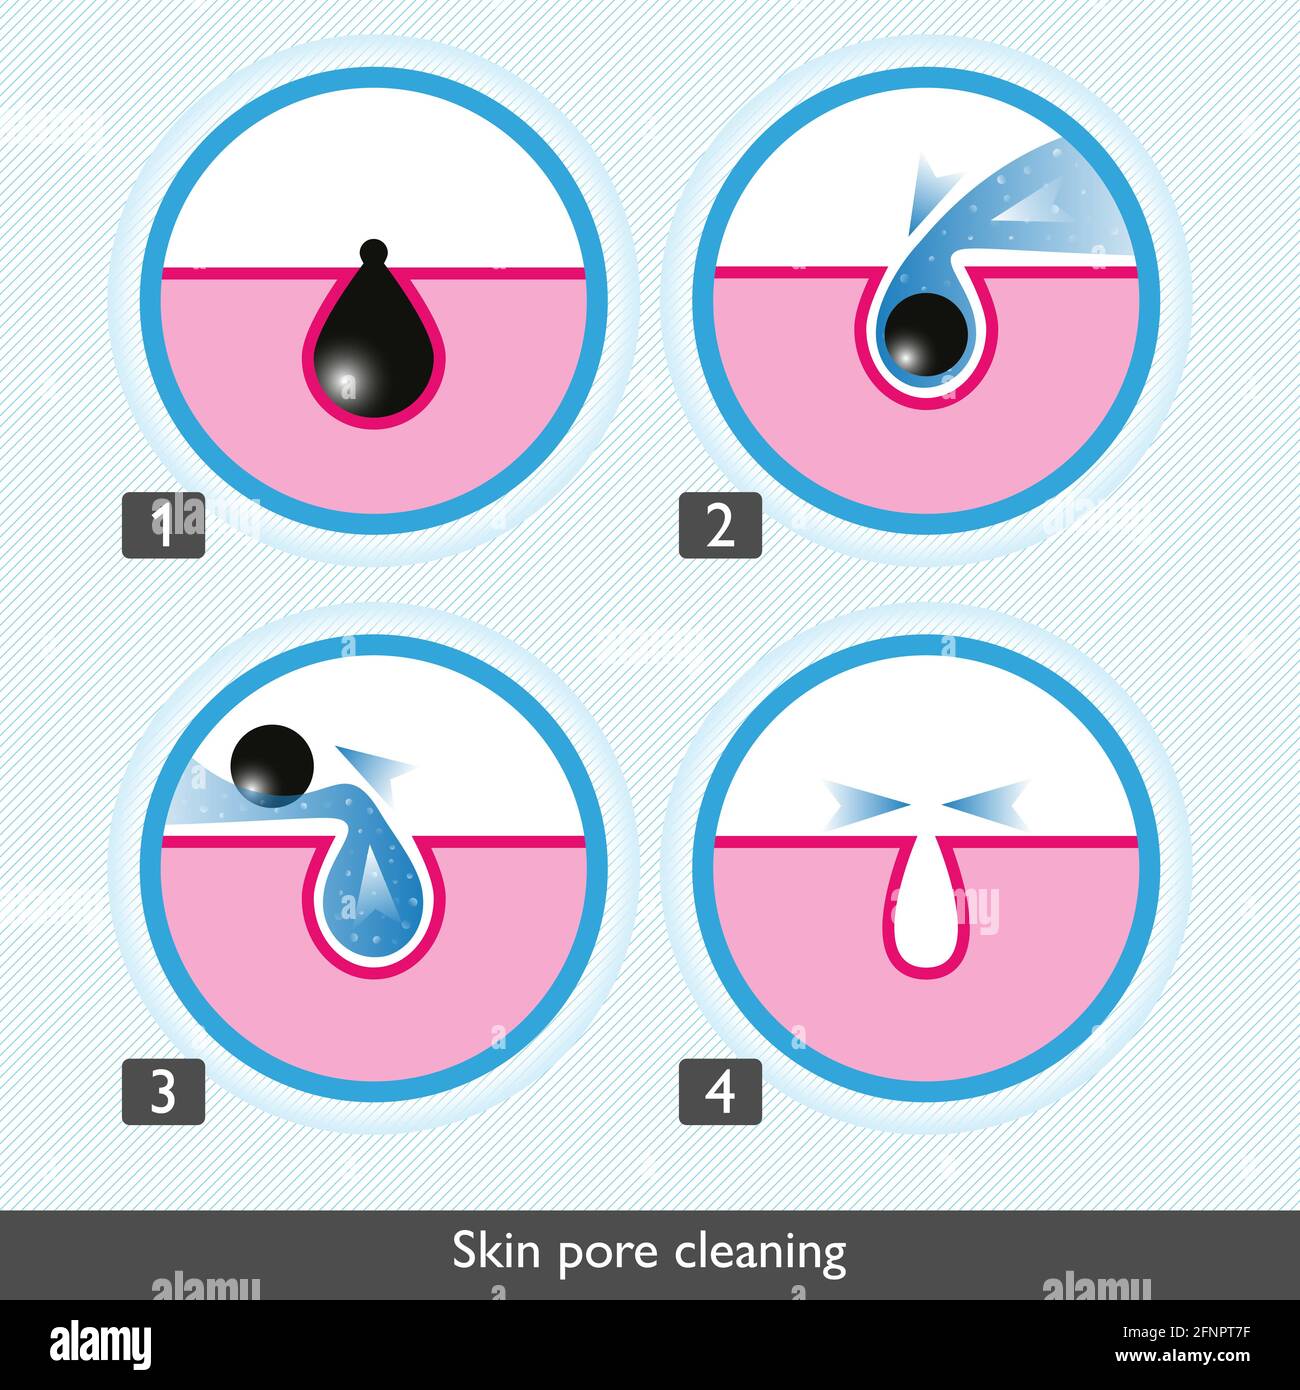 Skin pore cleansing process icons. Facial treatments colored icons. Treatment of skin diseases, sebum removal and pores cleaning and narrowing. Medica Stock Photo